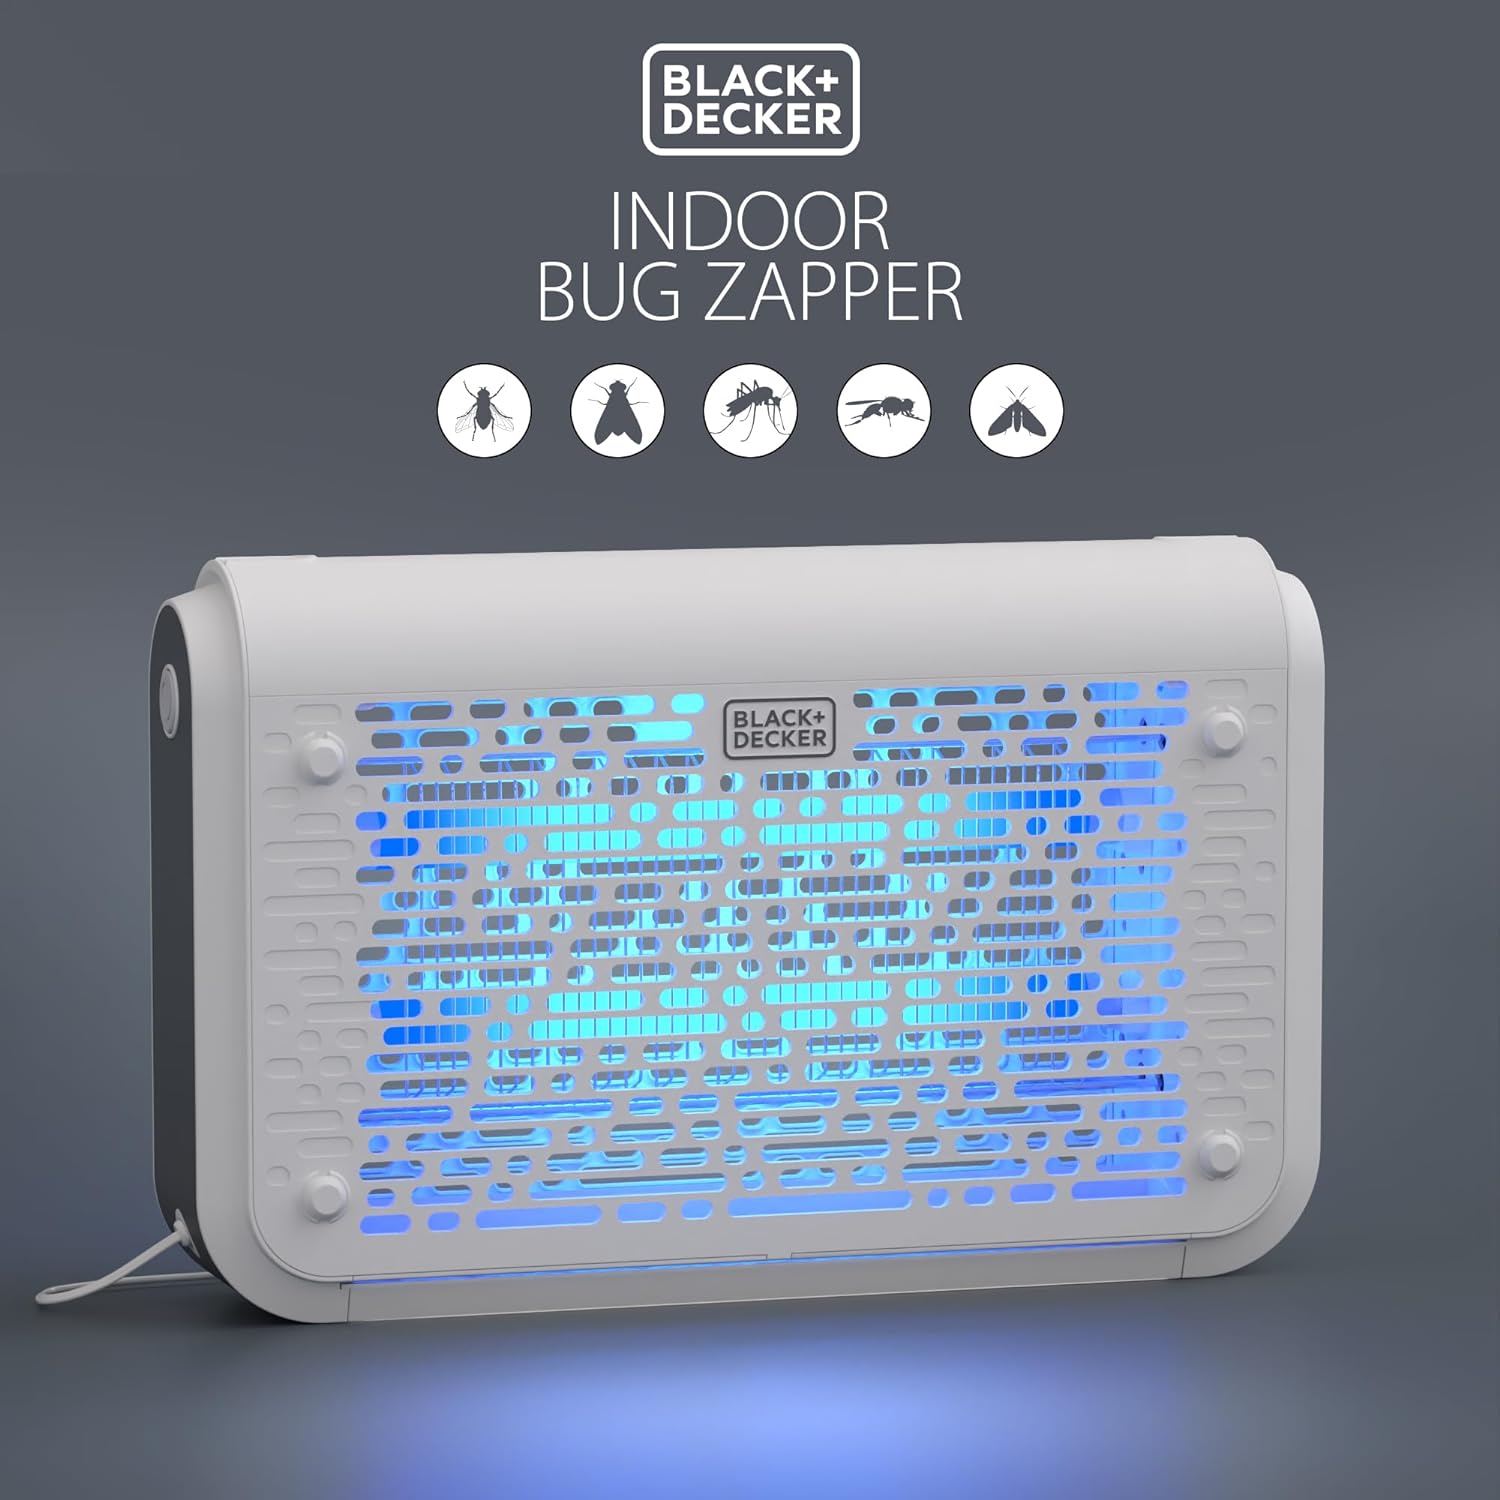 https://bigbigmart.com/wp-content/uploads/2023/10/BLACKDECKER-Bug-Zapper-Electric-UV-Insect-Killer-Catcher-for-Flies-Gnats-Mosquitoes-Other-Flying-Pests-6000-Sq-Ft-Coverage-for-Indoor-Outdoor-Use-Includes-Home-Kitchen-Other-Areas0.jpg